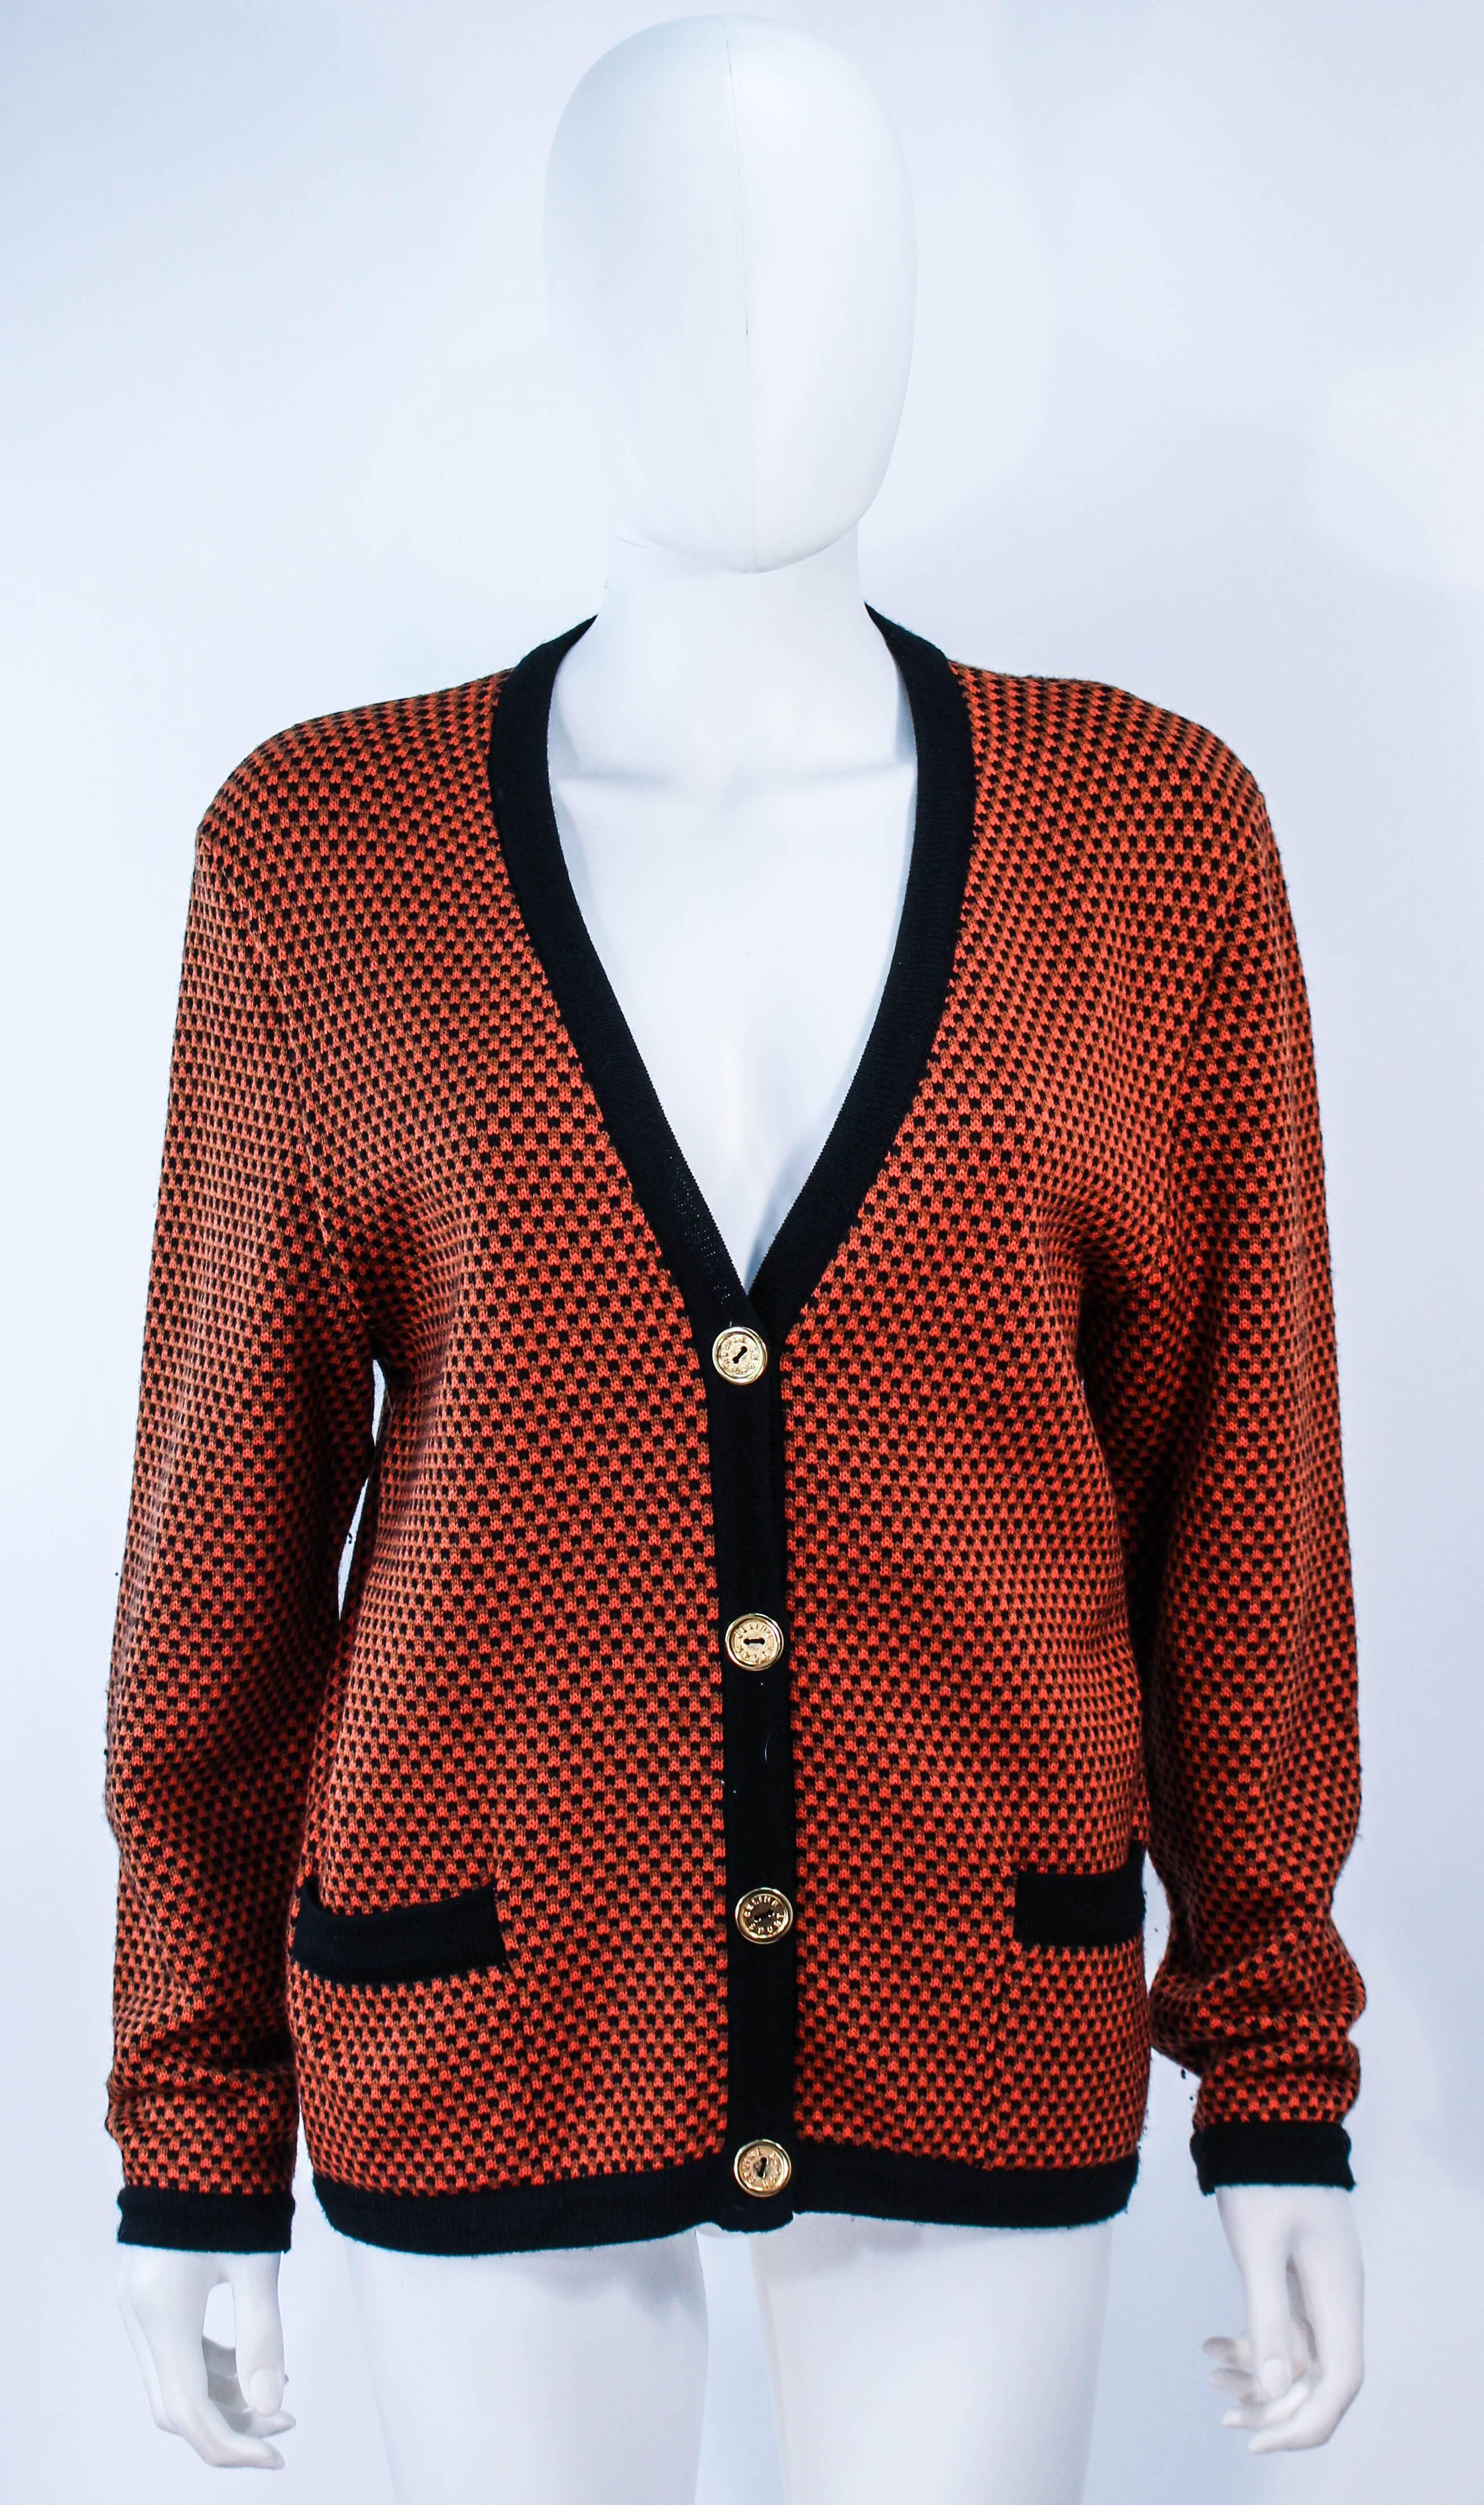 This vintage Celine sweater is composed of a black and orange wool. Features center front gold buttons with front pockets. In excellent vintage condition.

**Please cross-reference measurements for personal accuracy. Size in description box is an